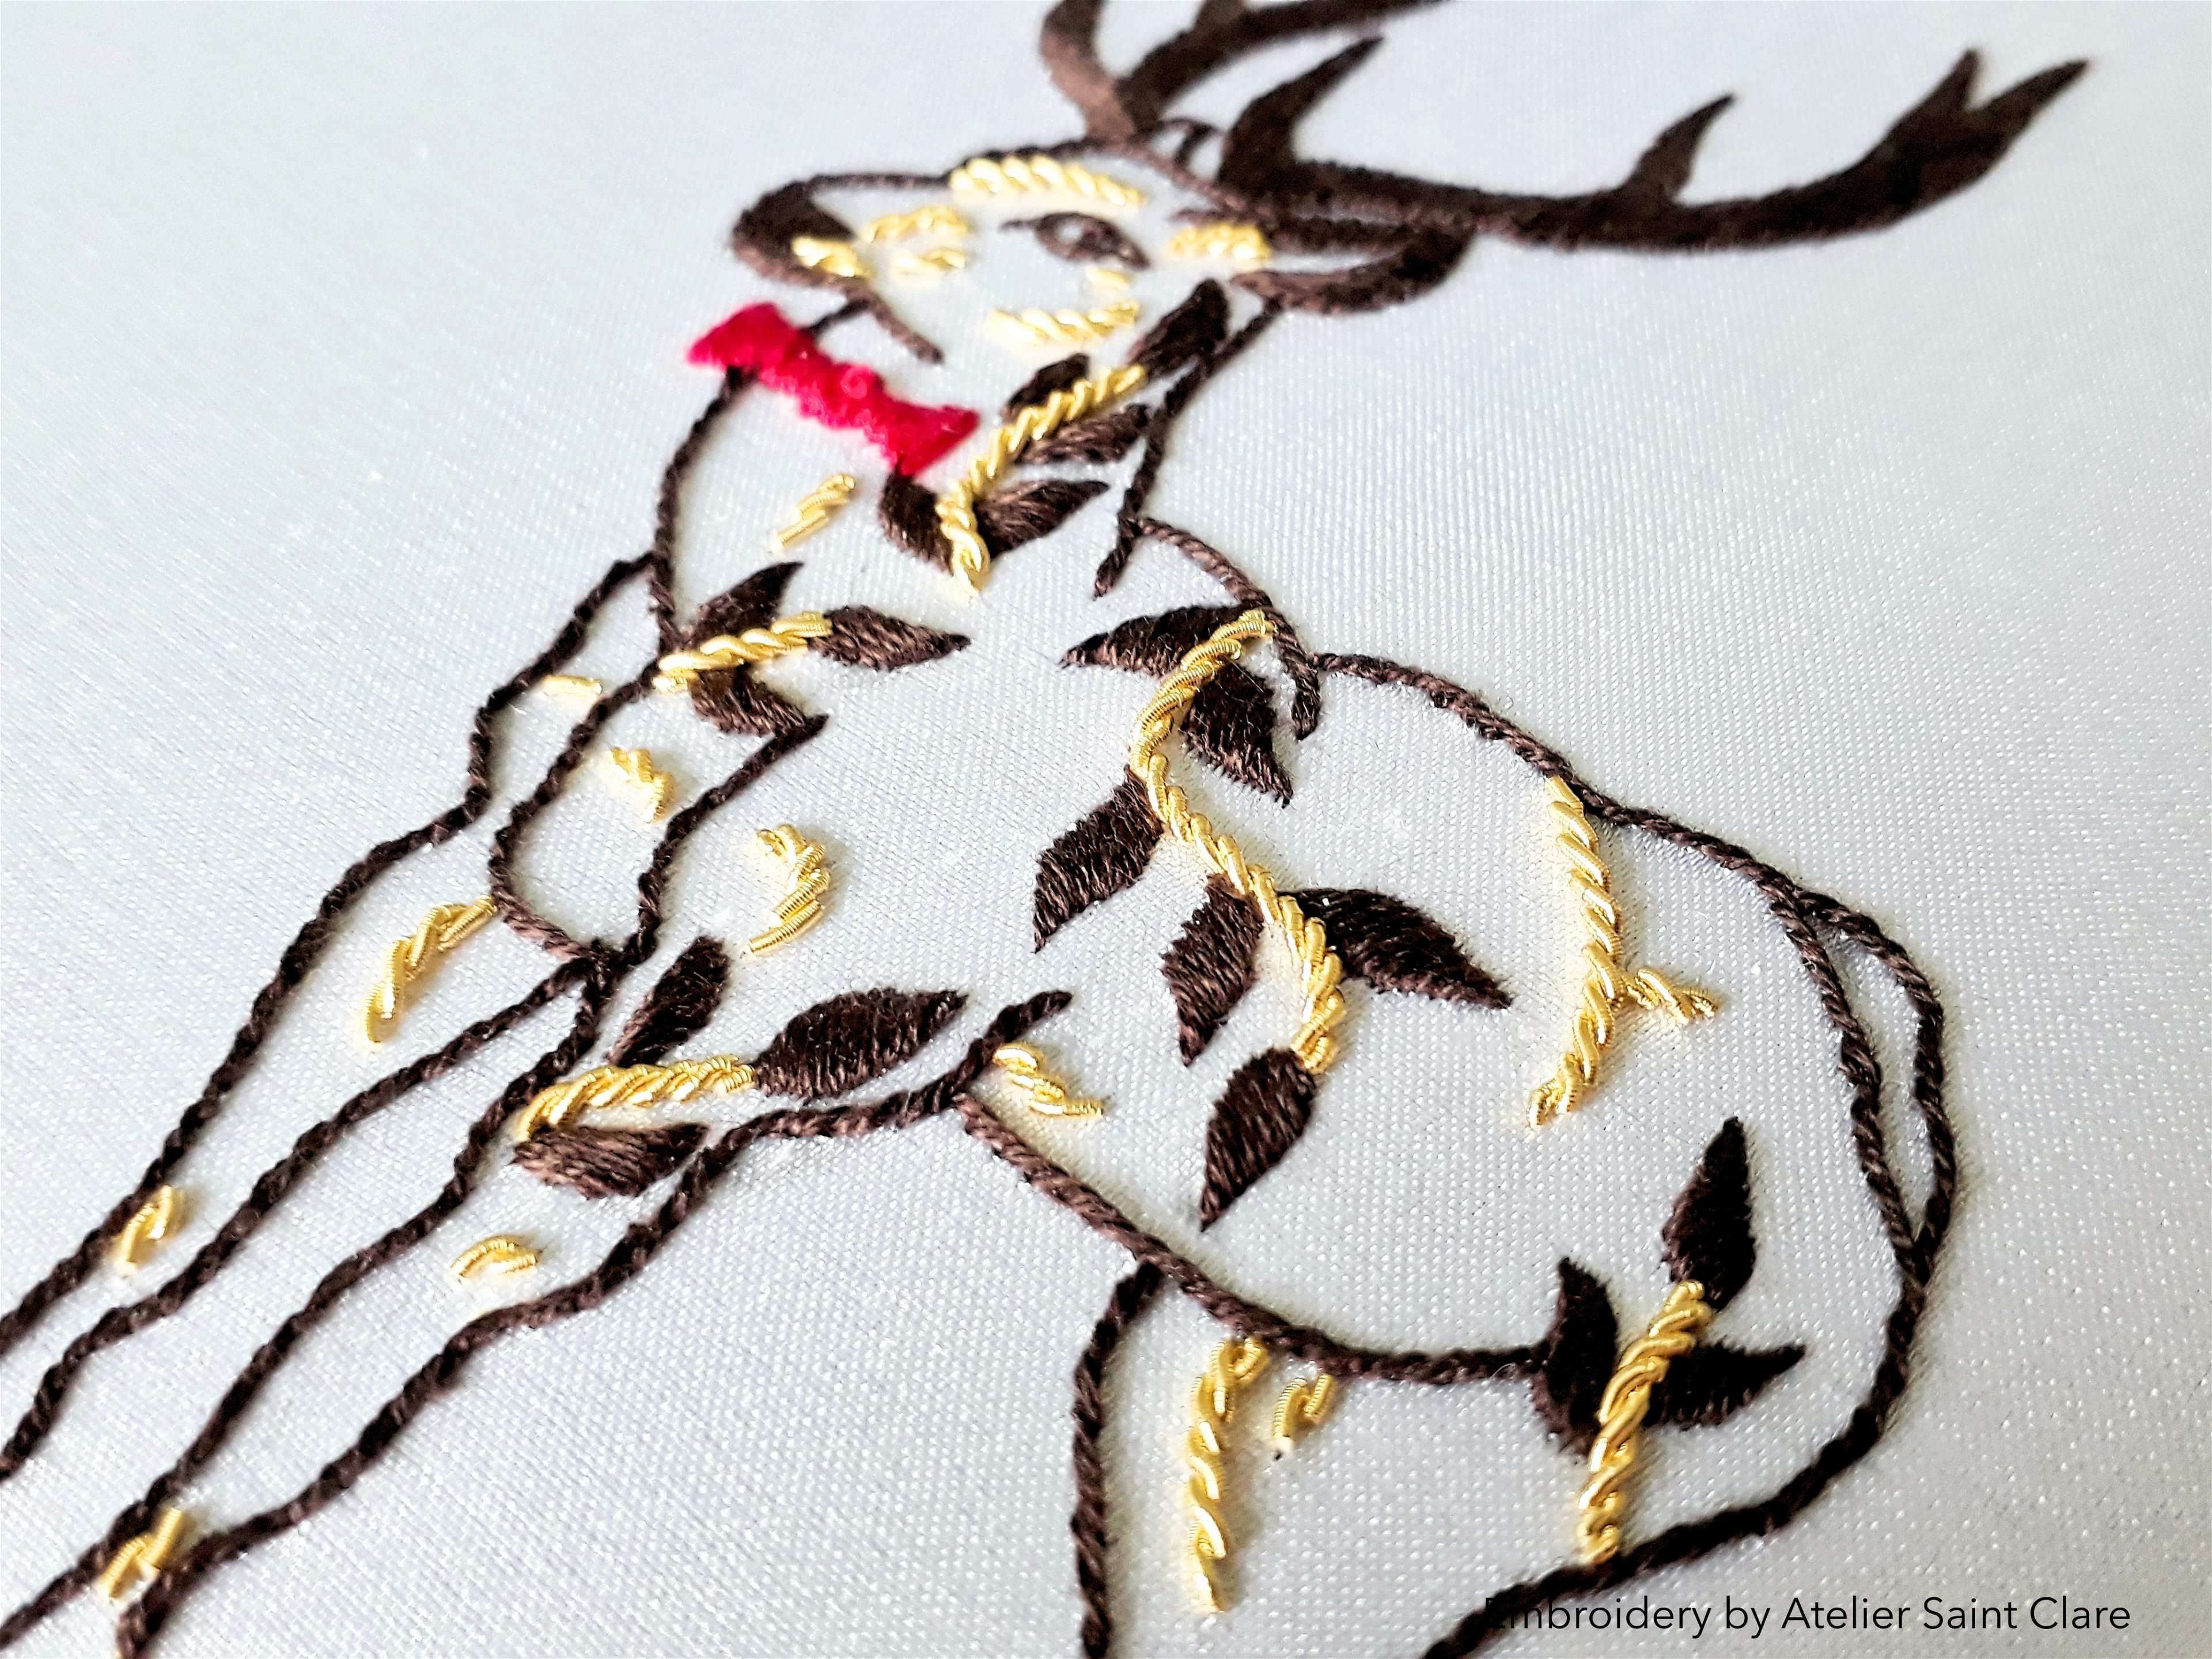 Surface stitch and goldwork embroidery: Live Zoom class